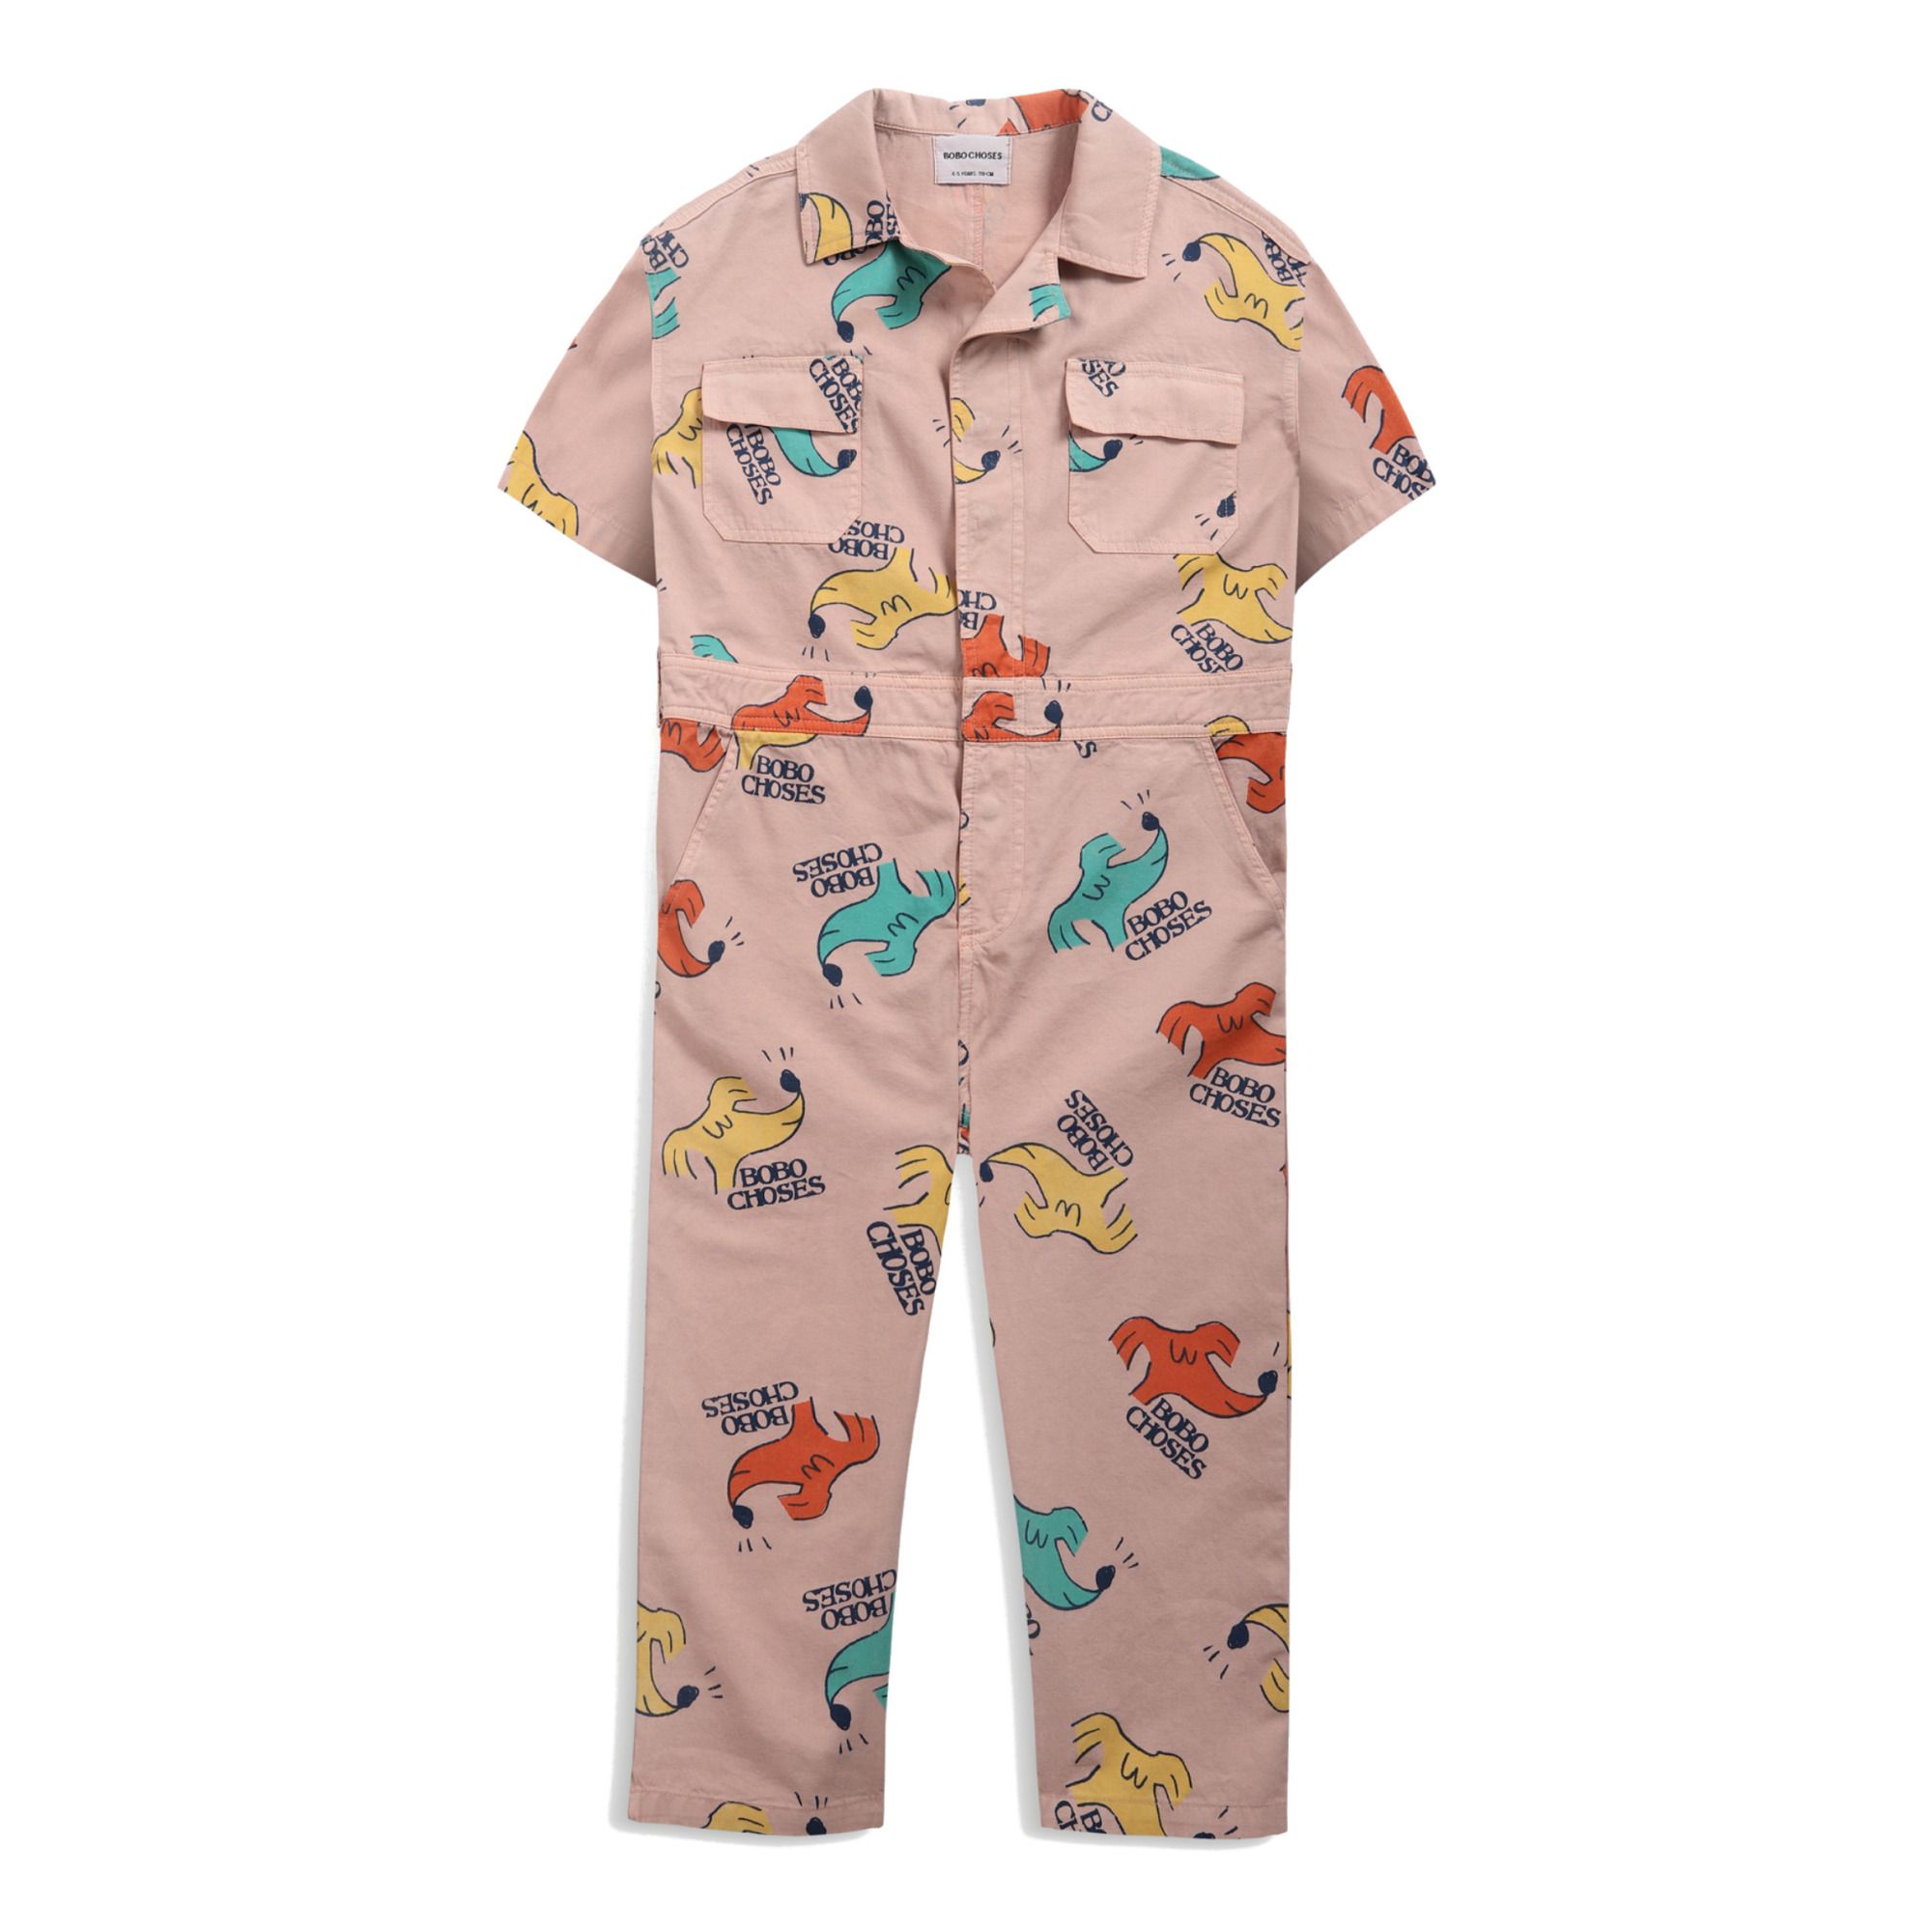 Dog Paw-1 Baby Unisex 100% Organic Cotton Rompers Costume Jumpsuit 0-2T